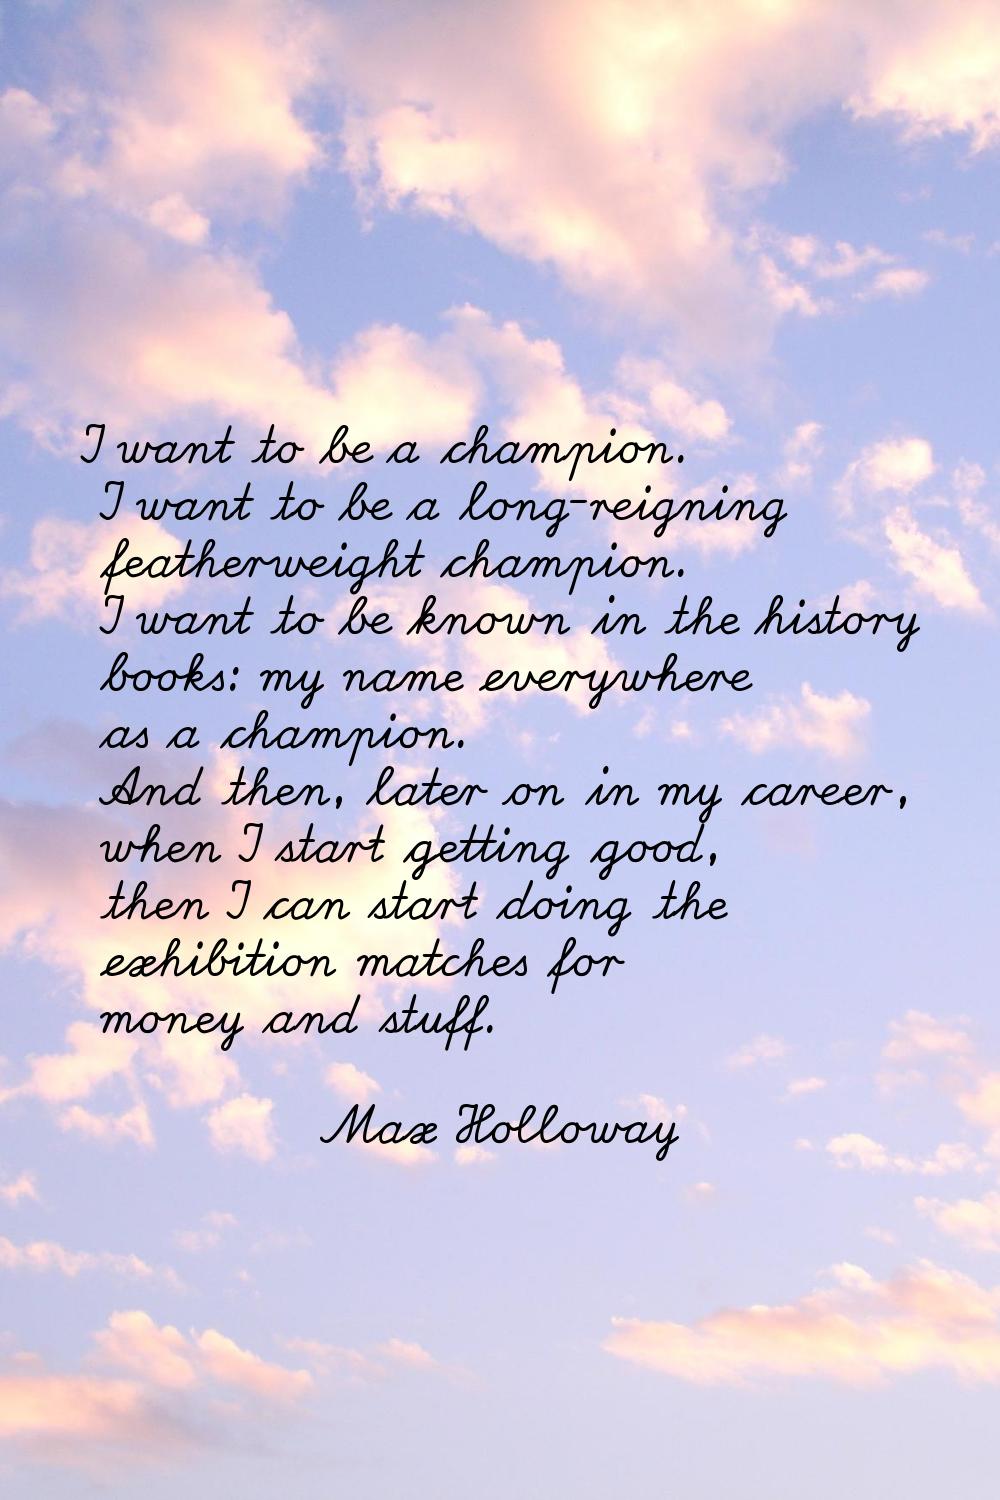 I want to be a champion. I want to be a long-reigning featherweight champion. I want to be known in